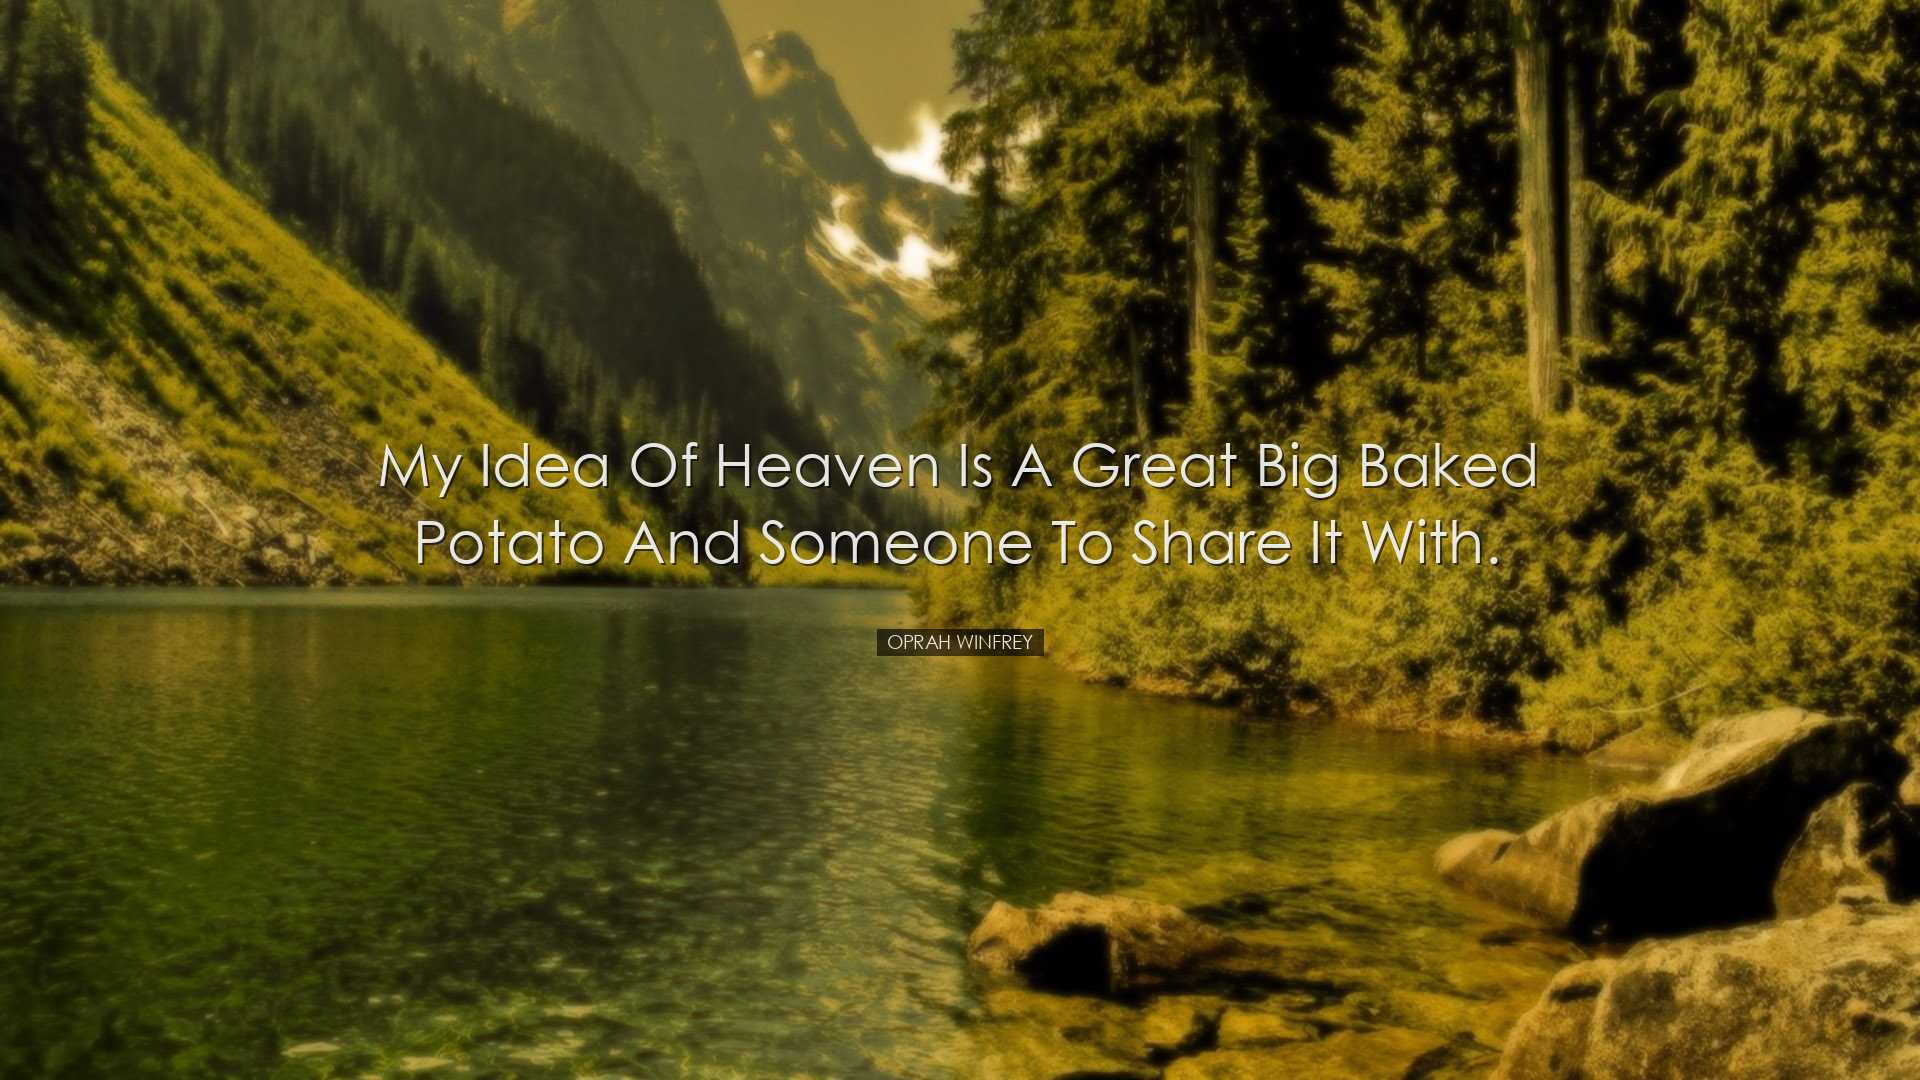 My idea of heaven is a great big baked potato and someone to share